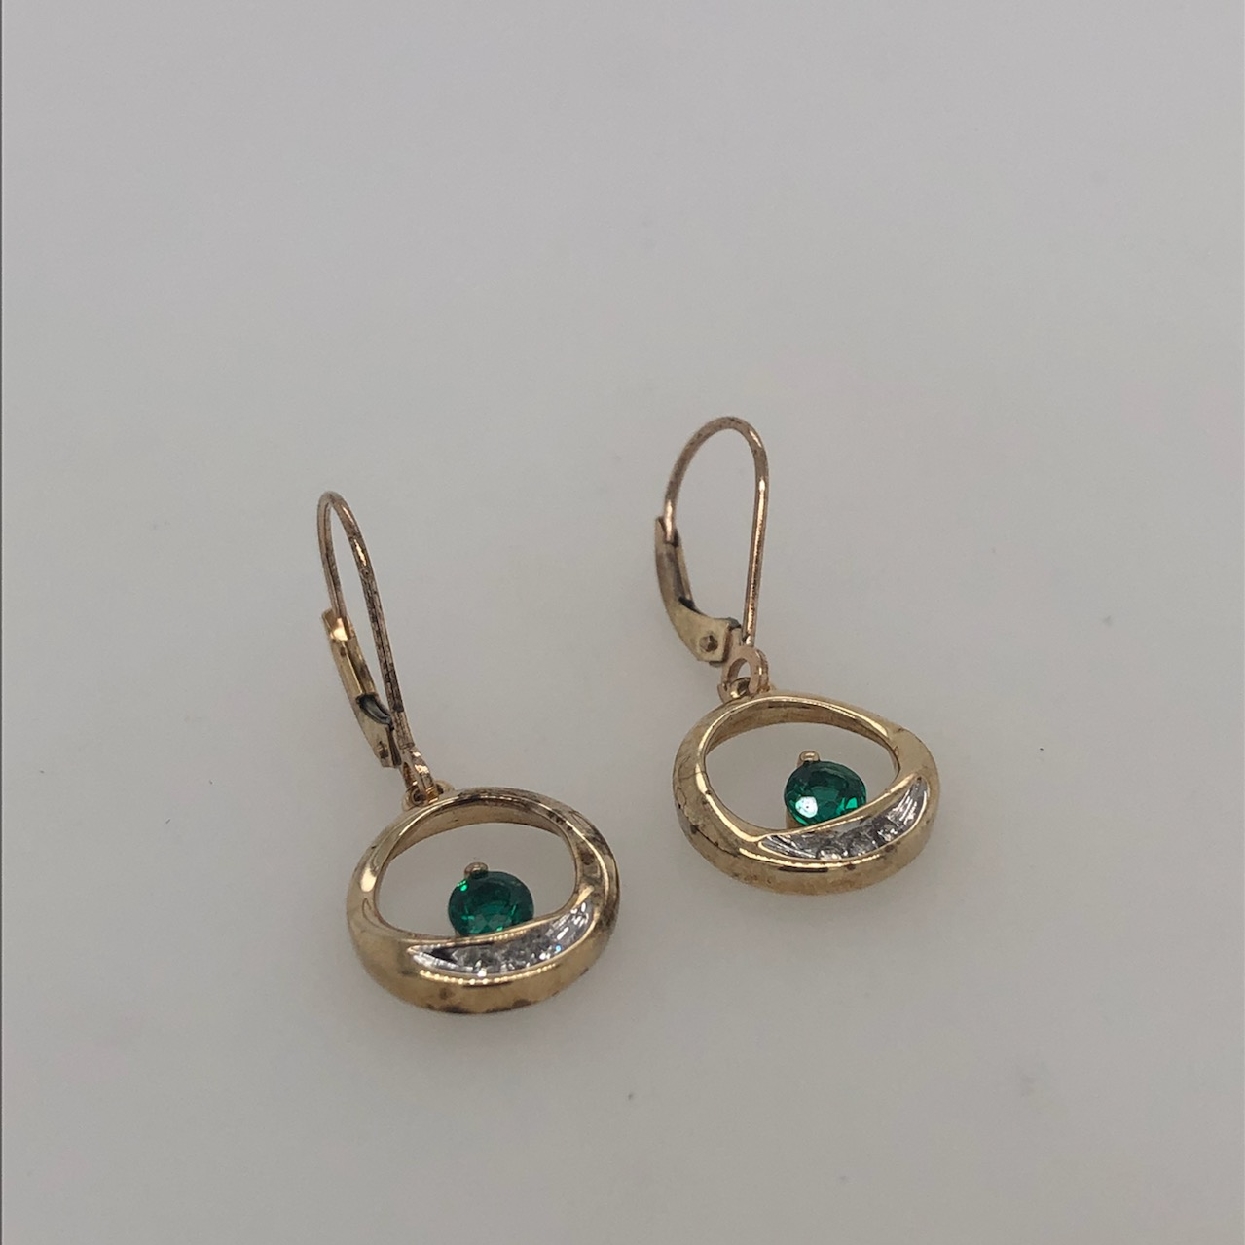 10K Yellow Gold Circular Drop Earrings with Diamonds and Synthetic Emerald 